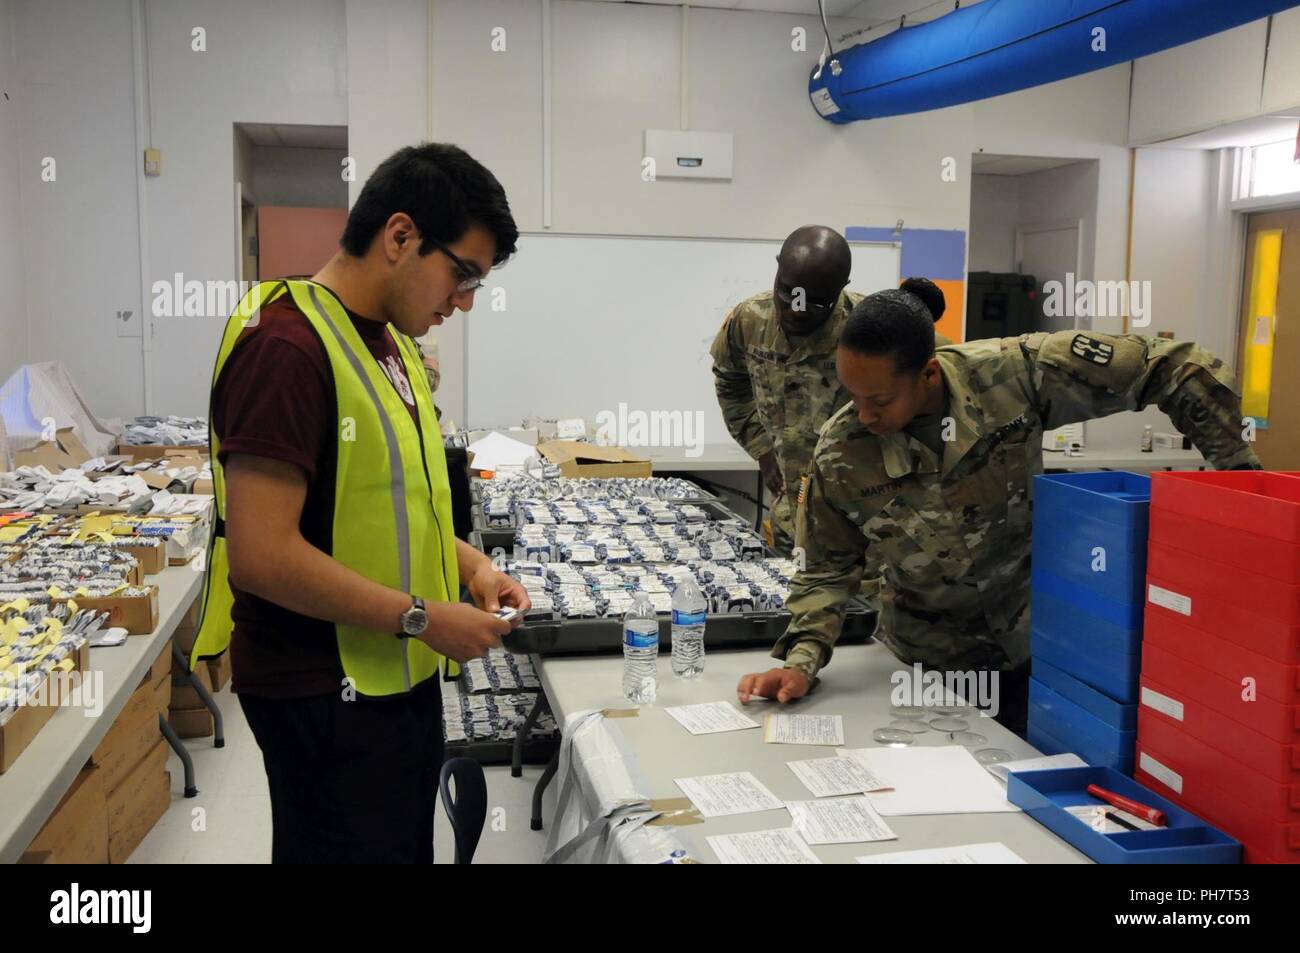 (LEFT TO RIGHT) Volunteer Juan Mata, a recently graduated Socorro High School, assists Sgt. Christen Martin, an optical laboratory specialist assigned to 31st Combat Support Hospital and Spc. Kodjo Koukoua, an Army Reserve optical laboratory specialist assigned to 7252nd Medical Support Unit, in processing new eye prescriptions for eyeglass fabrication at Escontrias Early Childhood Center in Socorro, Texas.  Martin and Koukoua are two of approximately 50 U.S. Army Reserve and U.S. Army Soldiers who are working in partnership with the Texas A&M Colonias program to provide medical care to El Pas Stock Photo